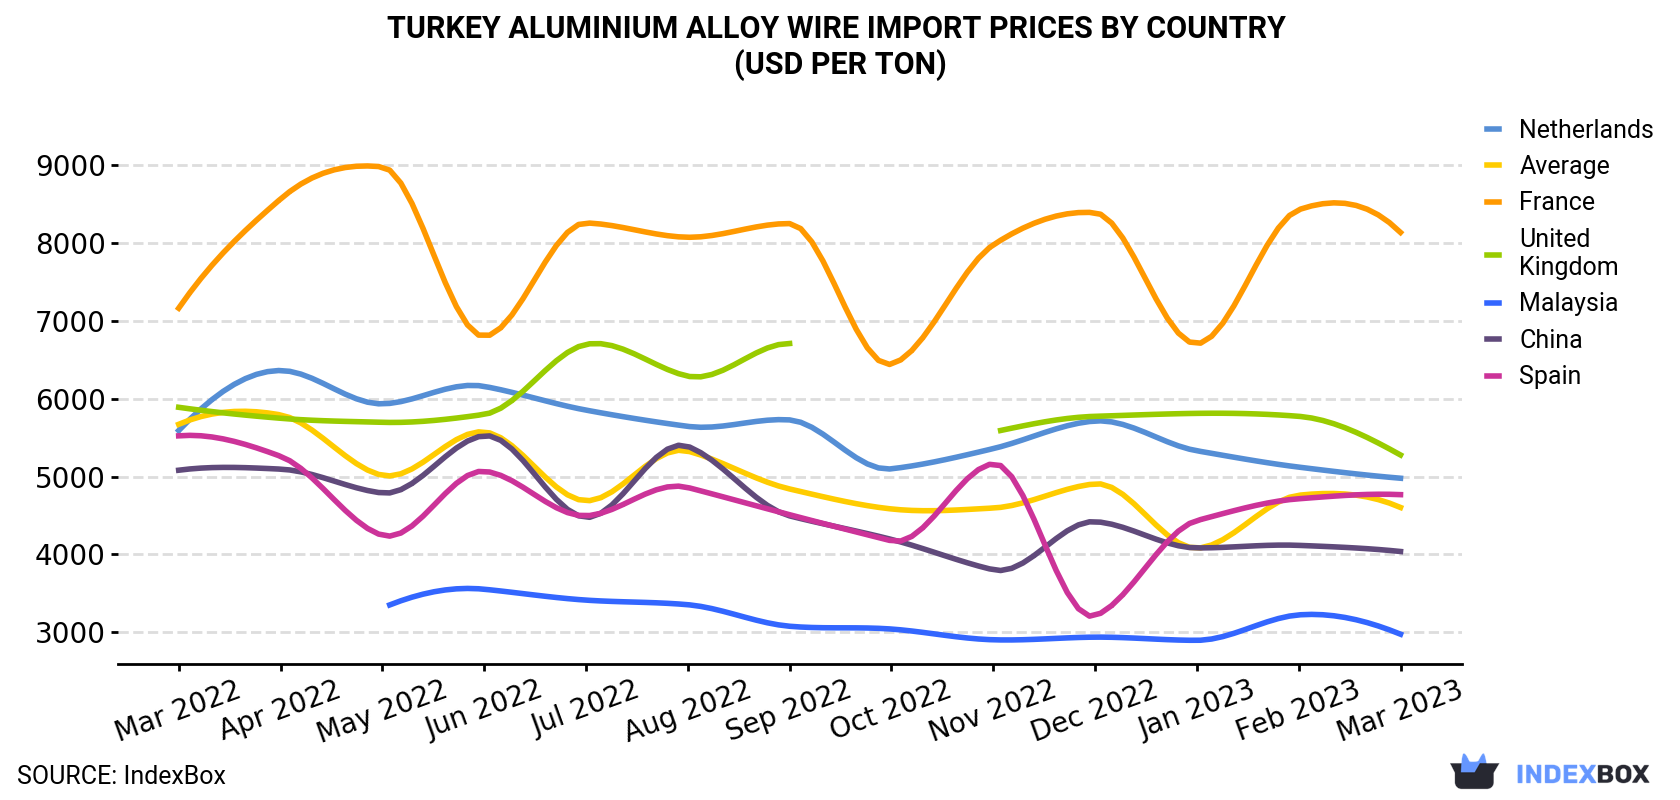 Turkey Aluminium Alloy Wire Import Prices By Country (USD Per Ton)